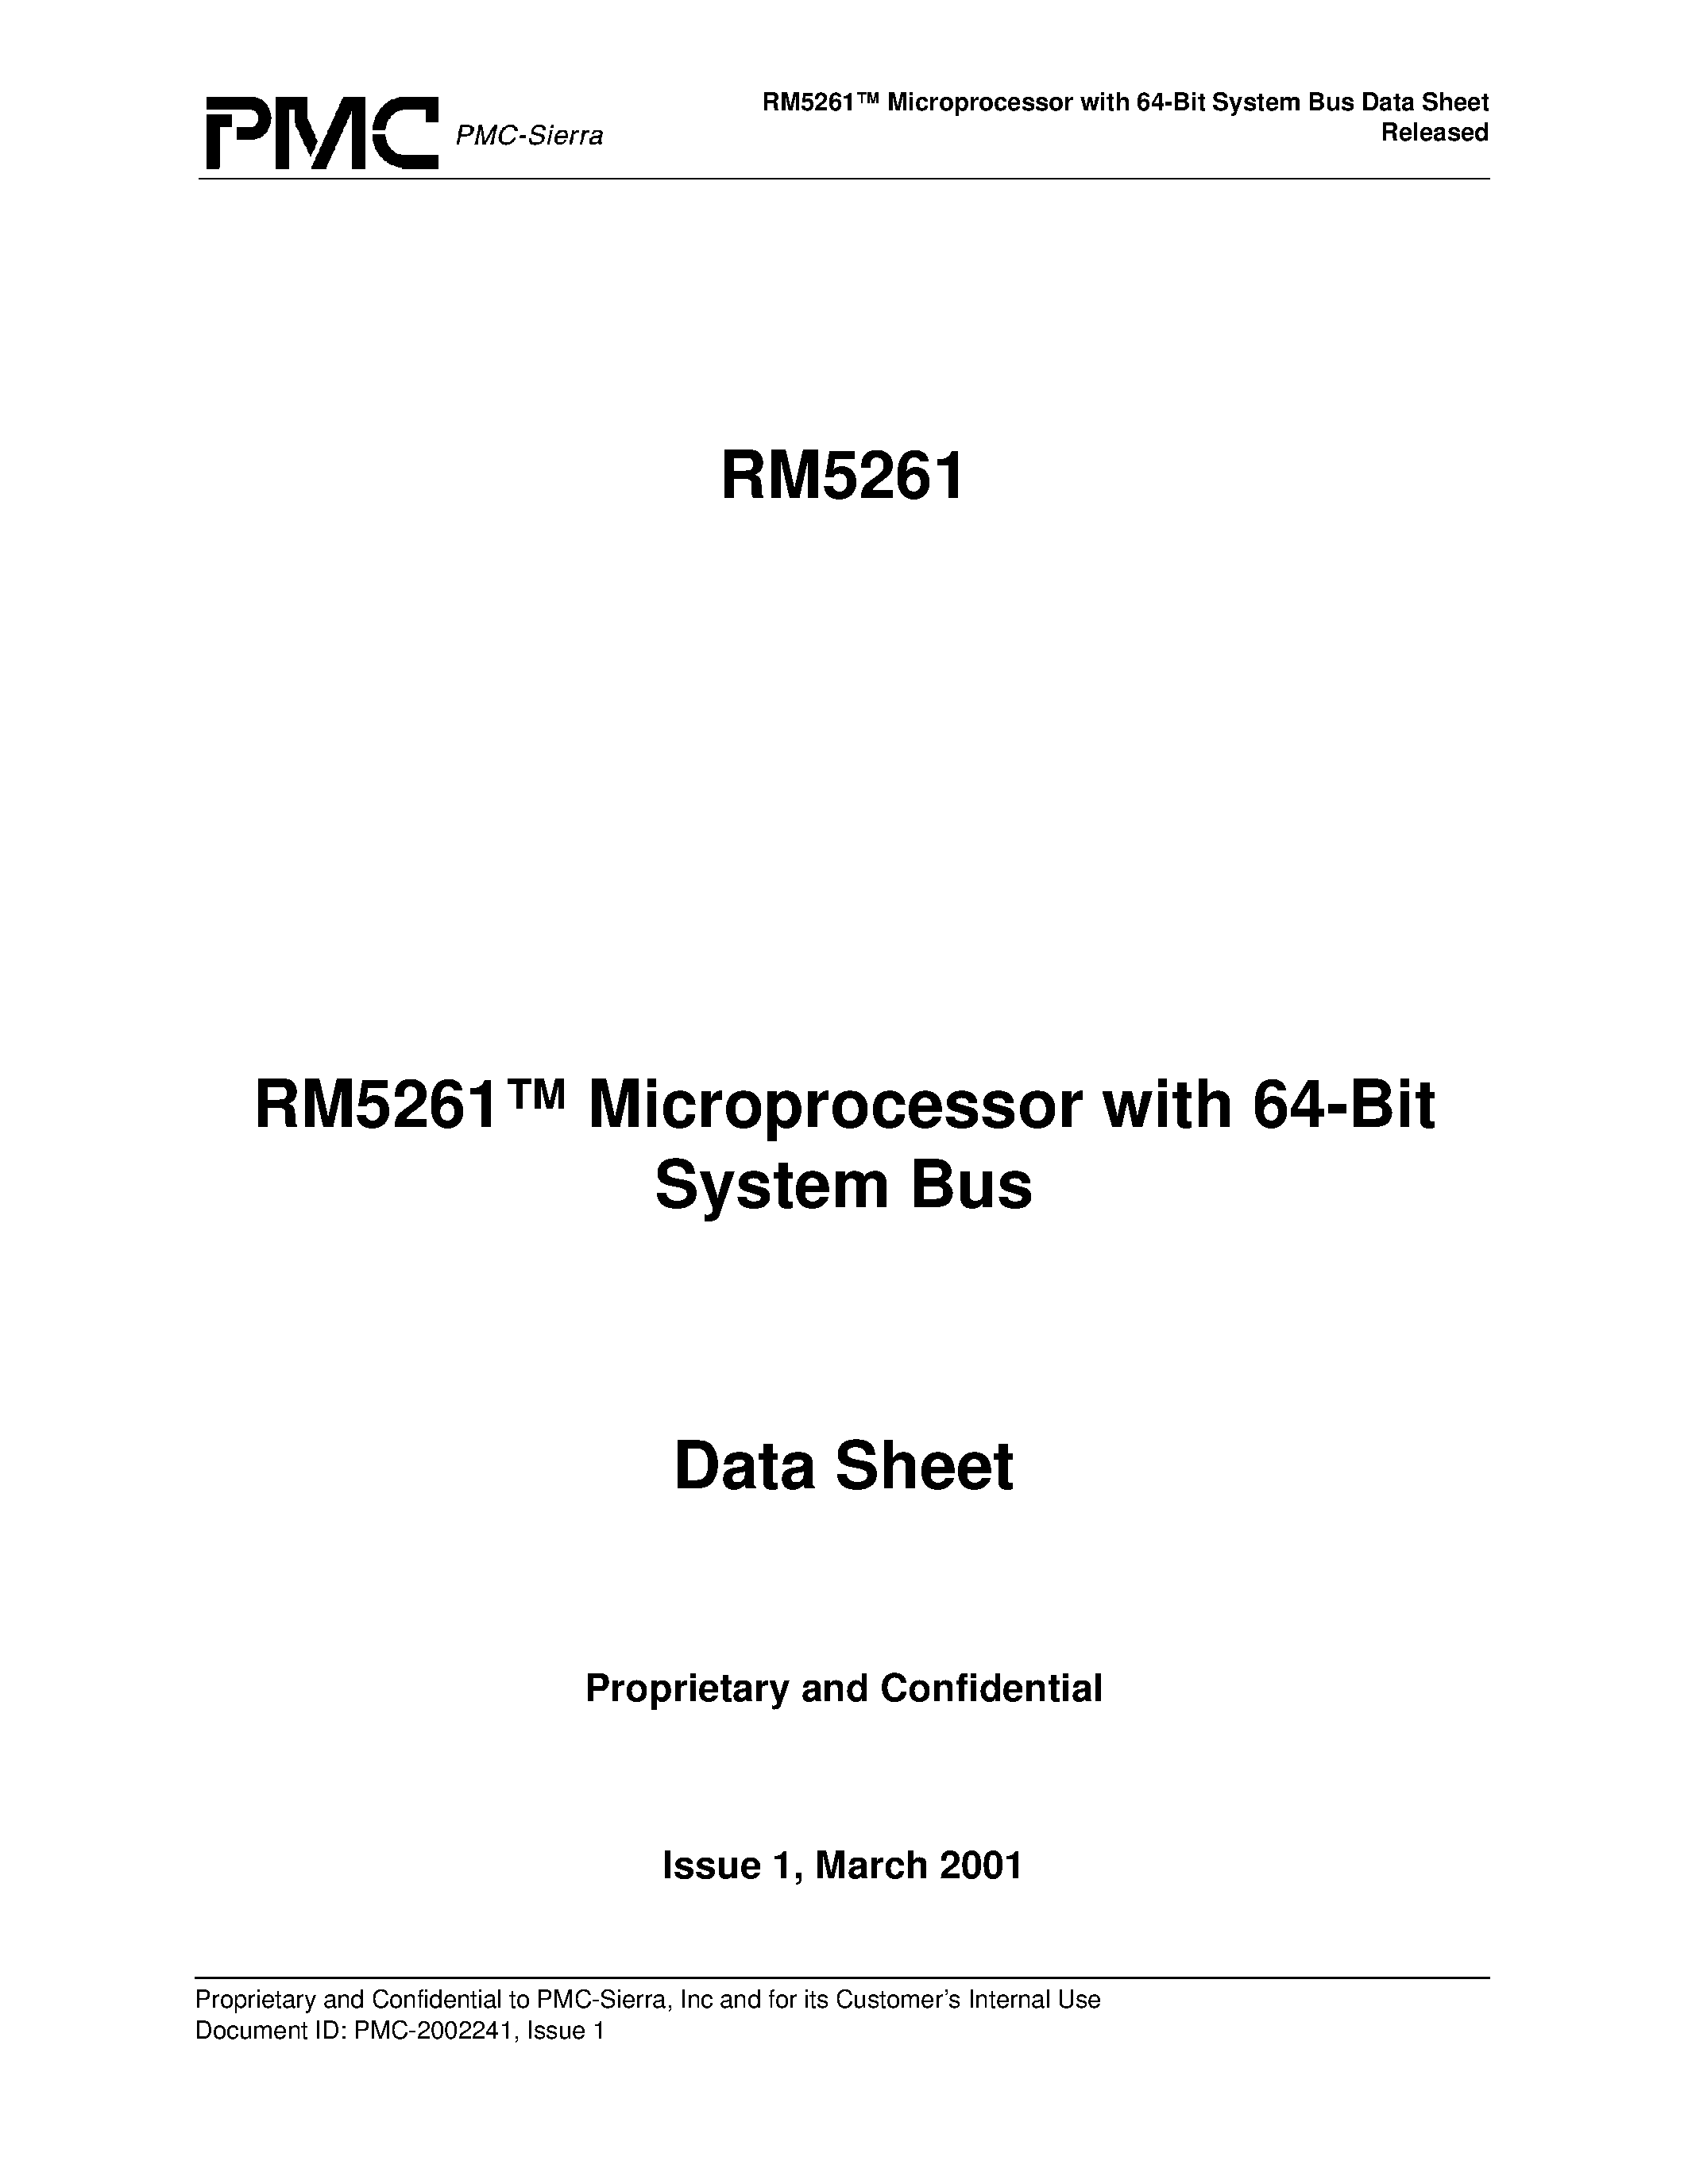 Datasheet RM5261-266-Q - RM5261 Microprocessor with 64-Bit System Bus Data Sheet Released page 1